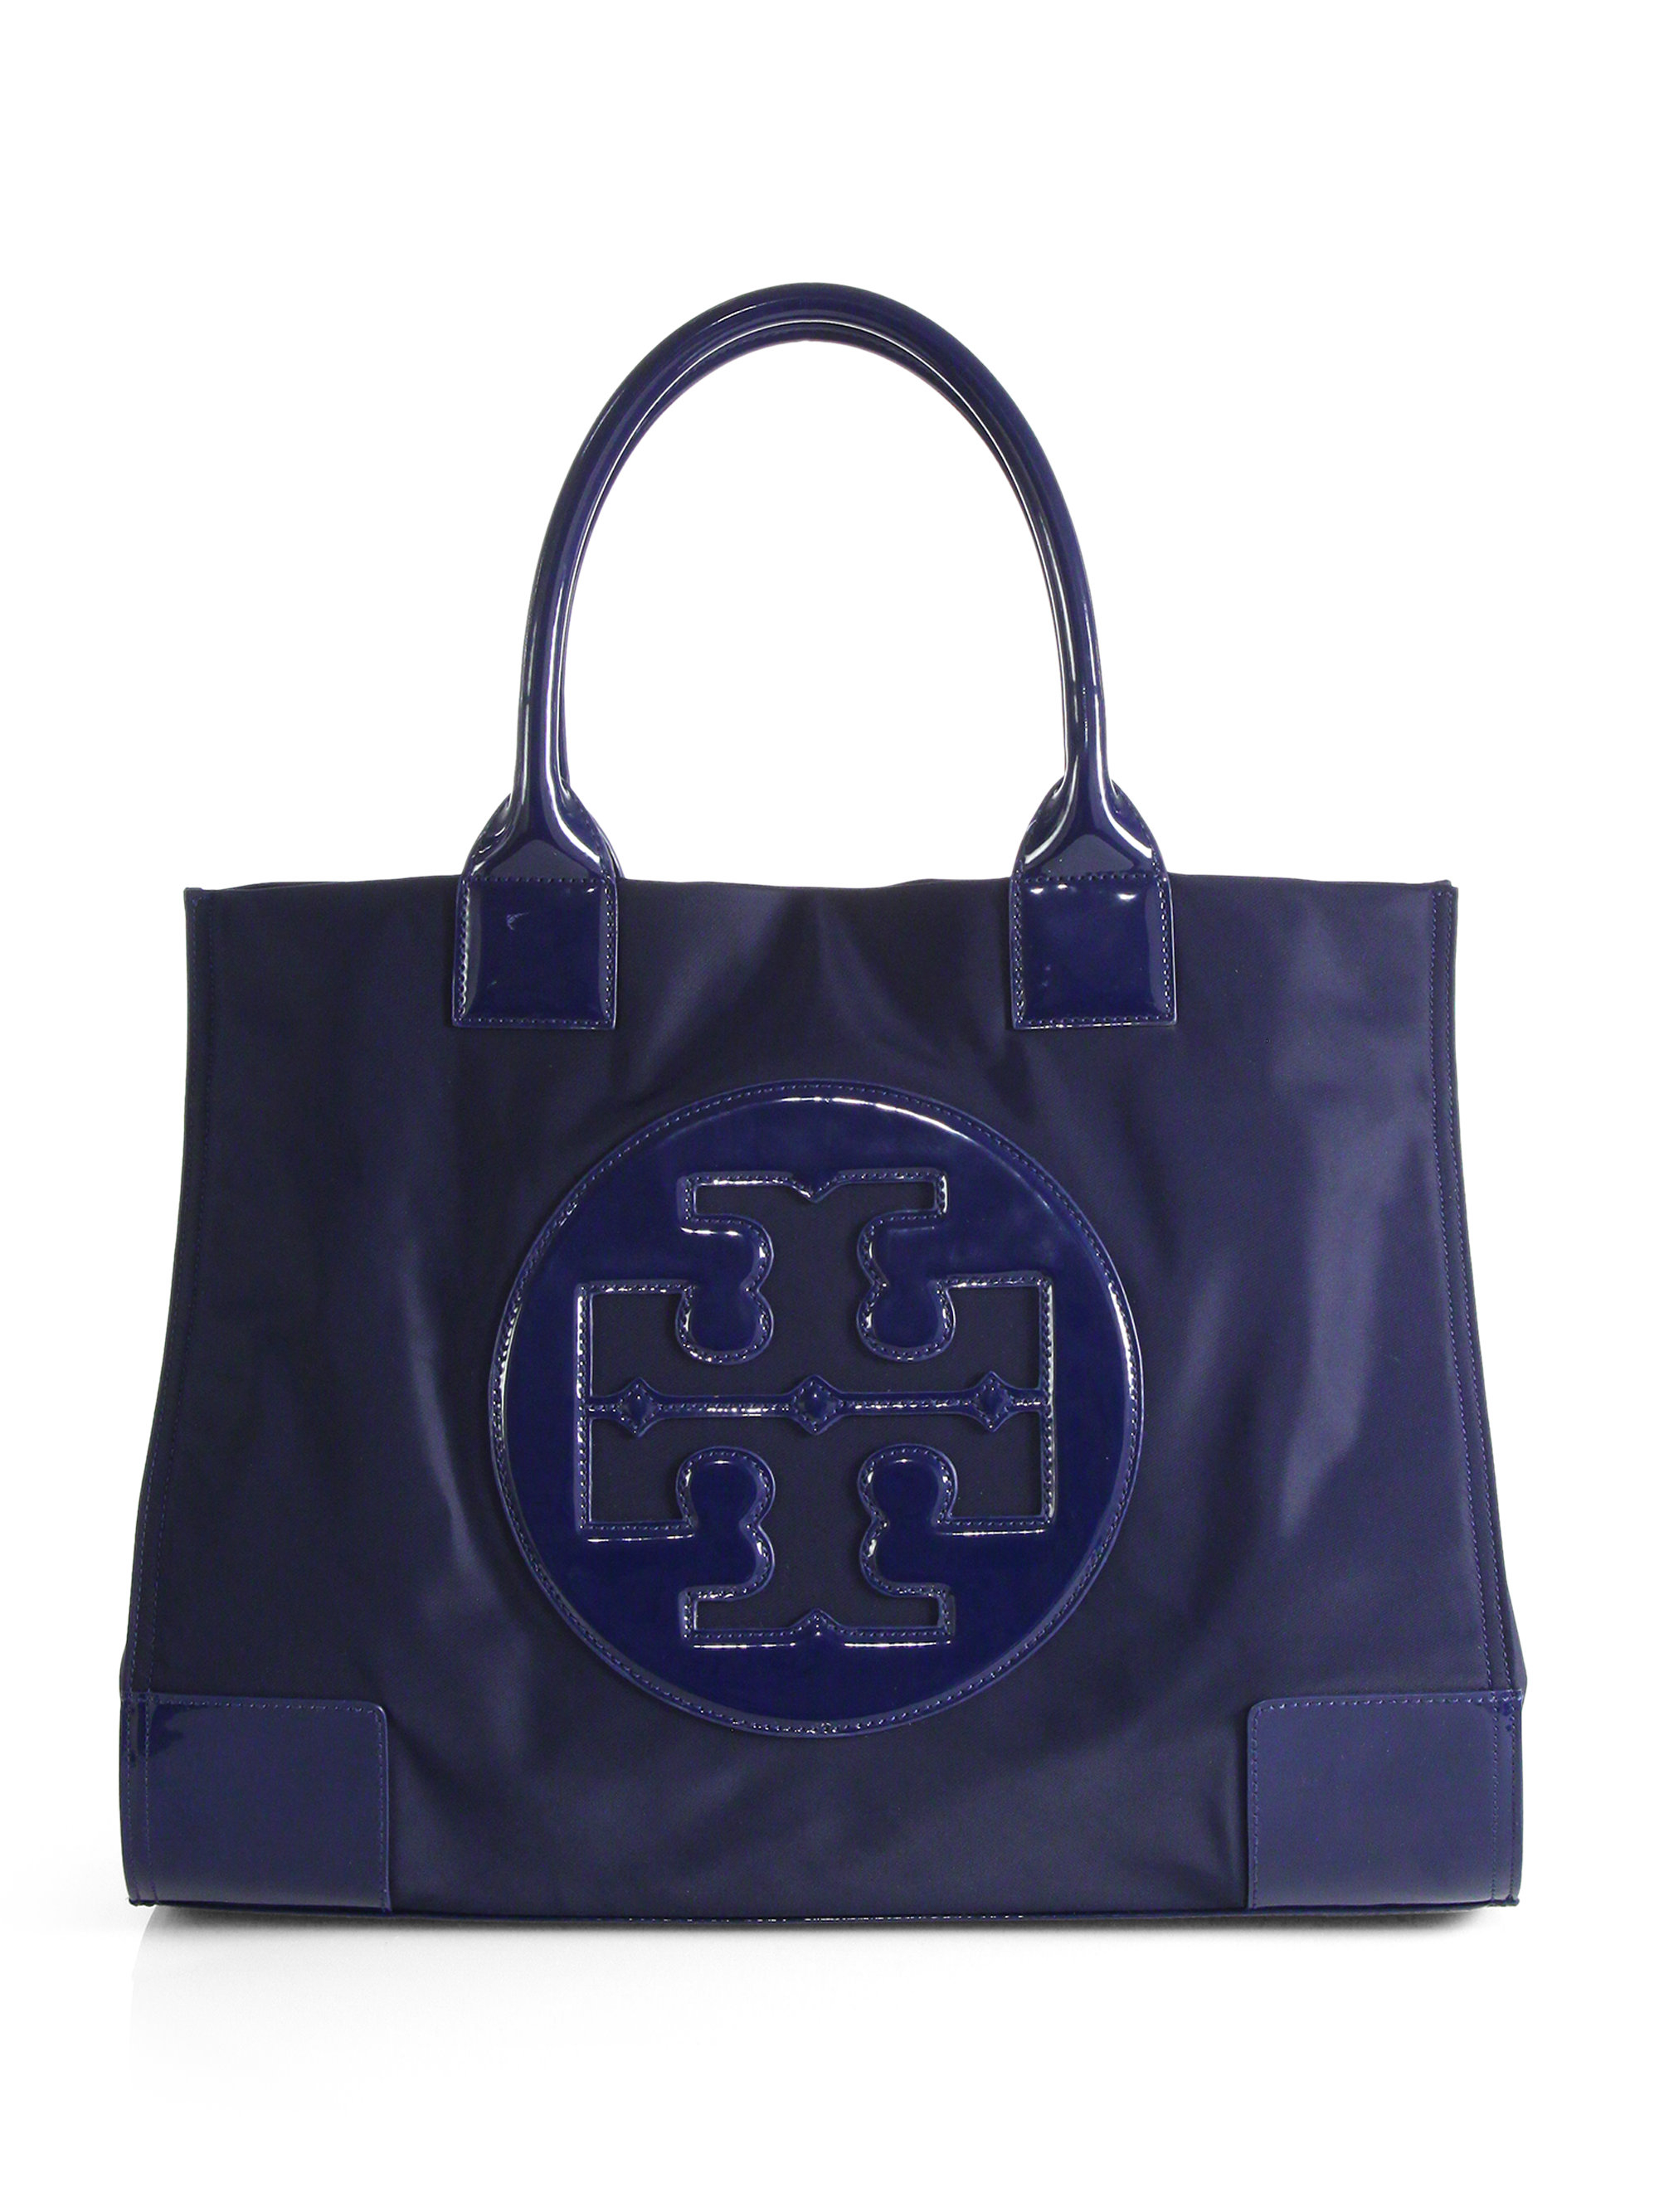 Tory Burch Ella Nylon & Faux Leather Tote in Blue (FRENCH NAVY) | Lyst